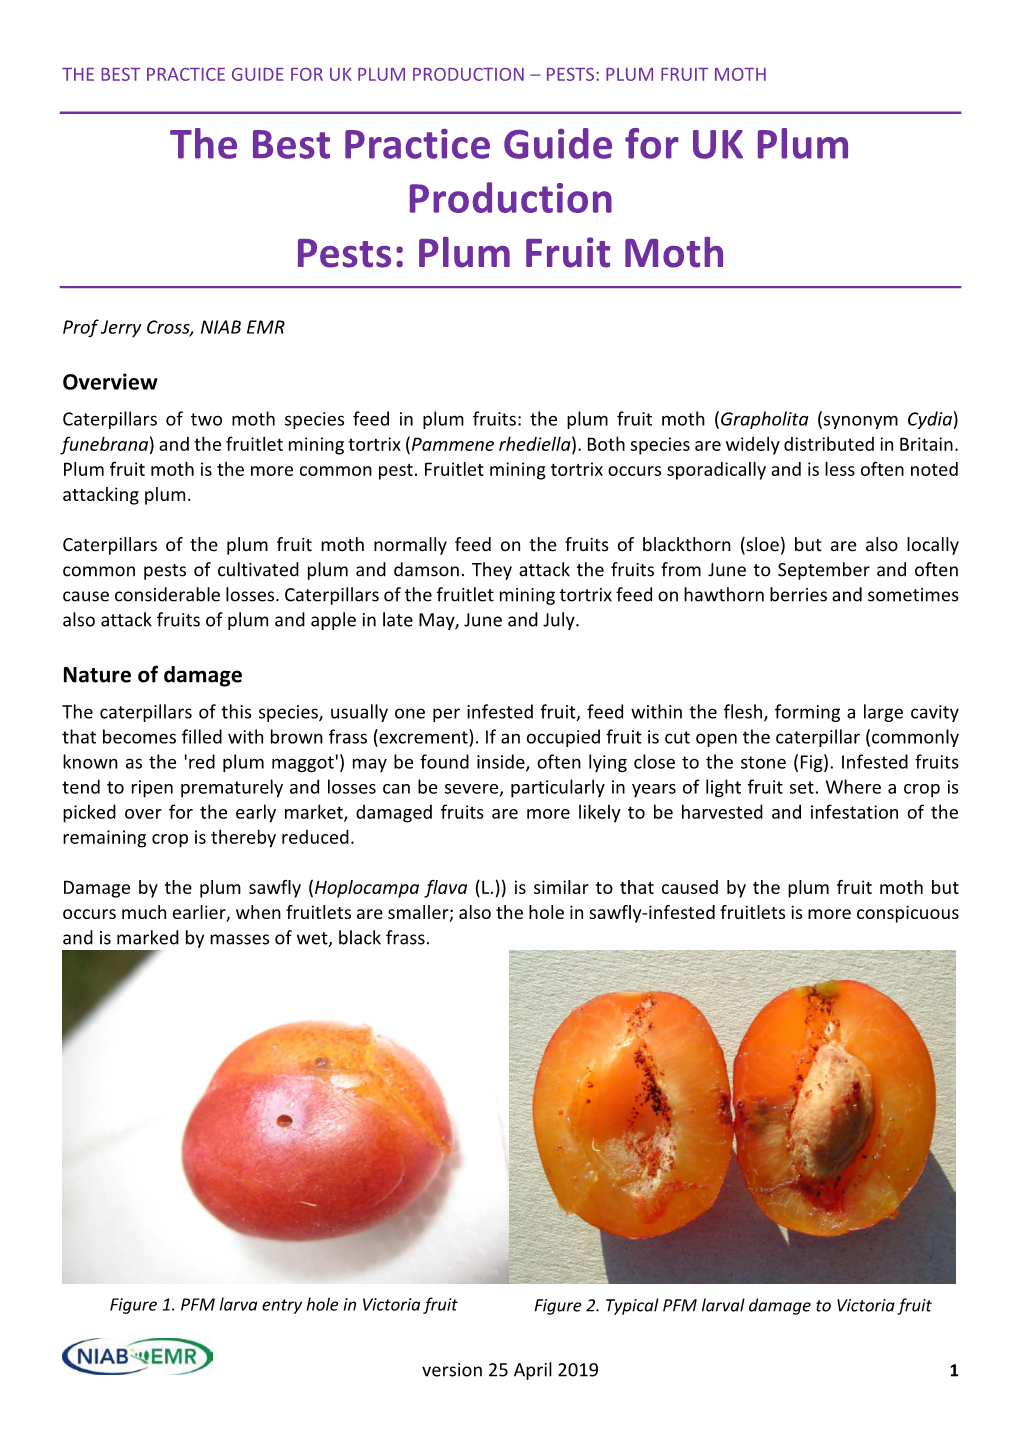 The Best Practice Guide for UK Plum Production Pests: Plum Fruit Moth